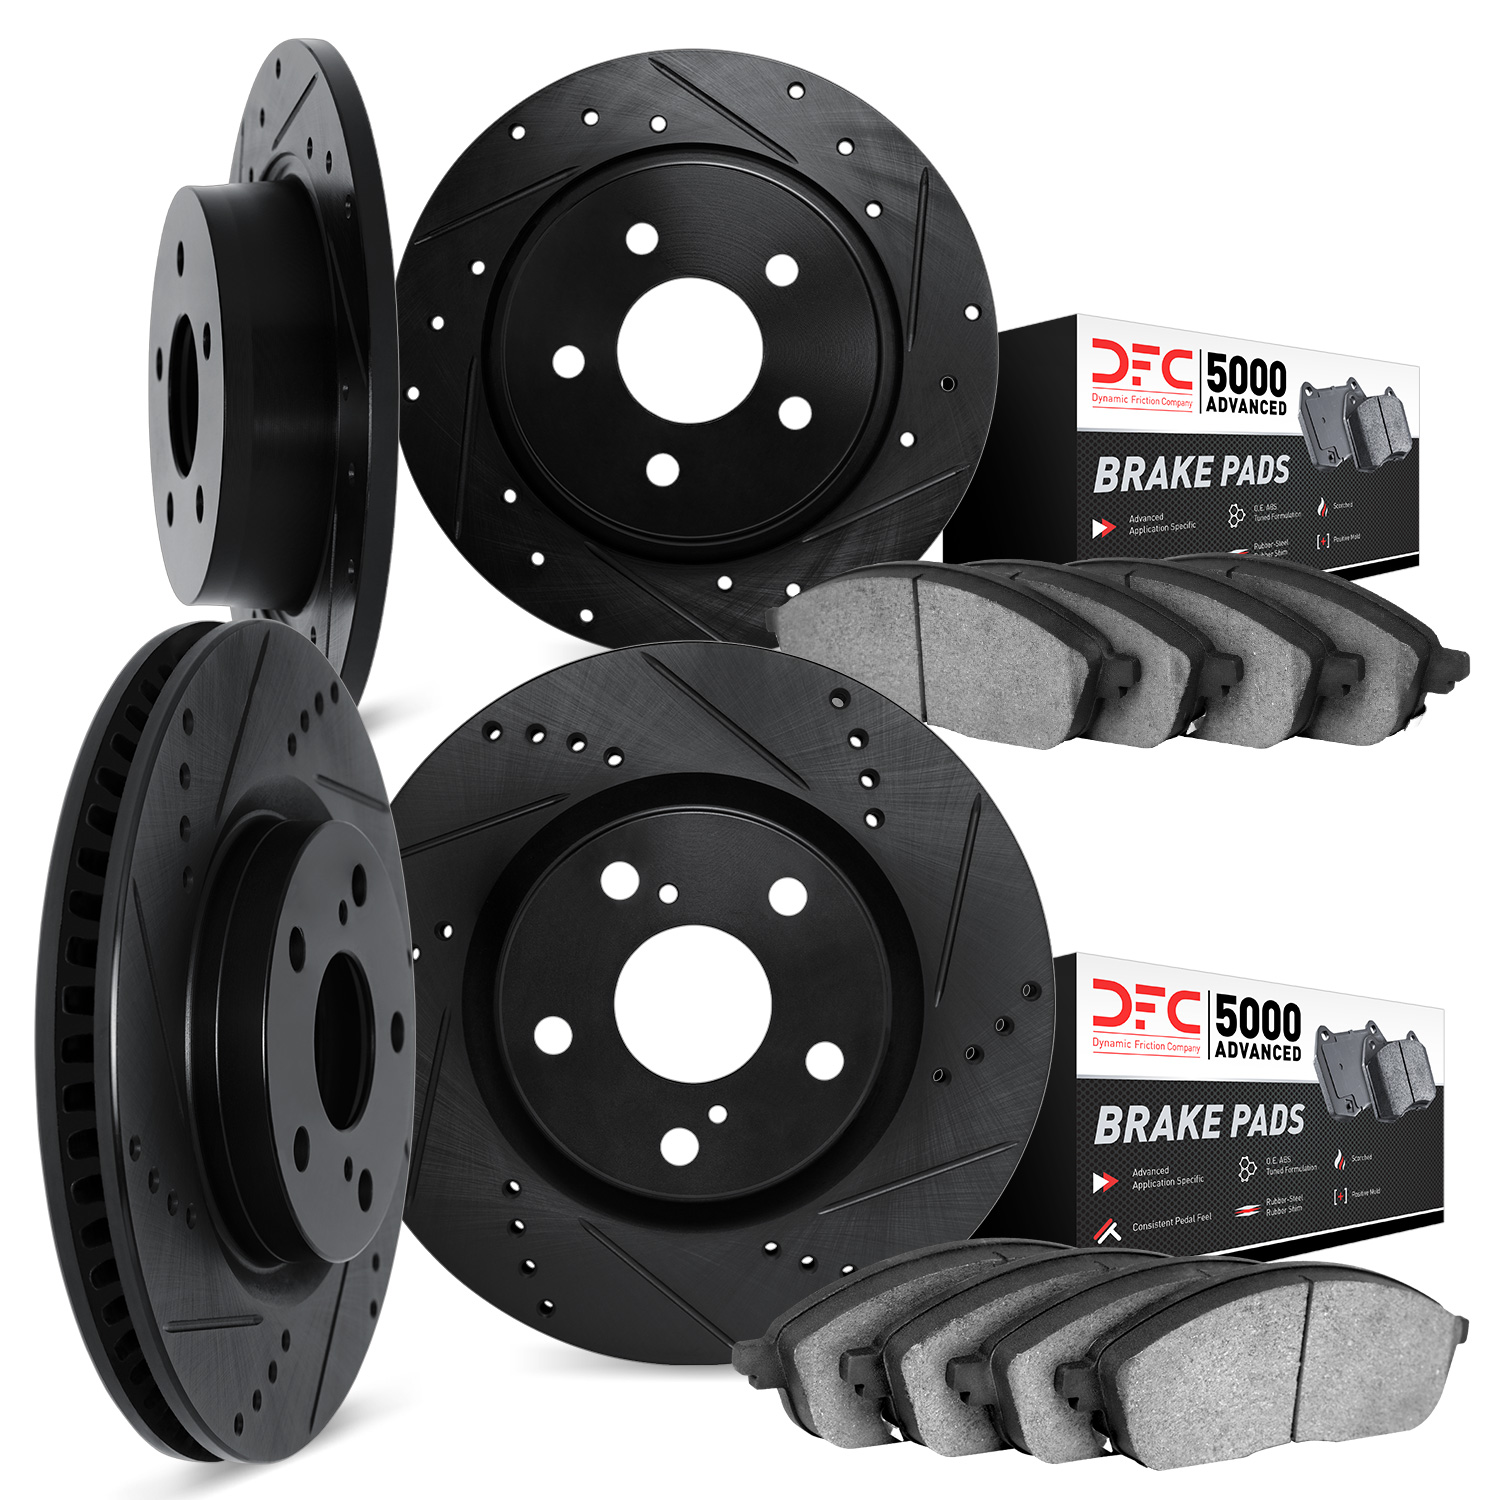 8504-92012 Drilled/Slotted Brake Rotors w/5000 Advanced Brake Pads Kit [Black], 2006-2007 BMW, Position: Front and Rear